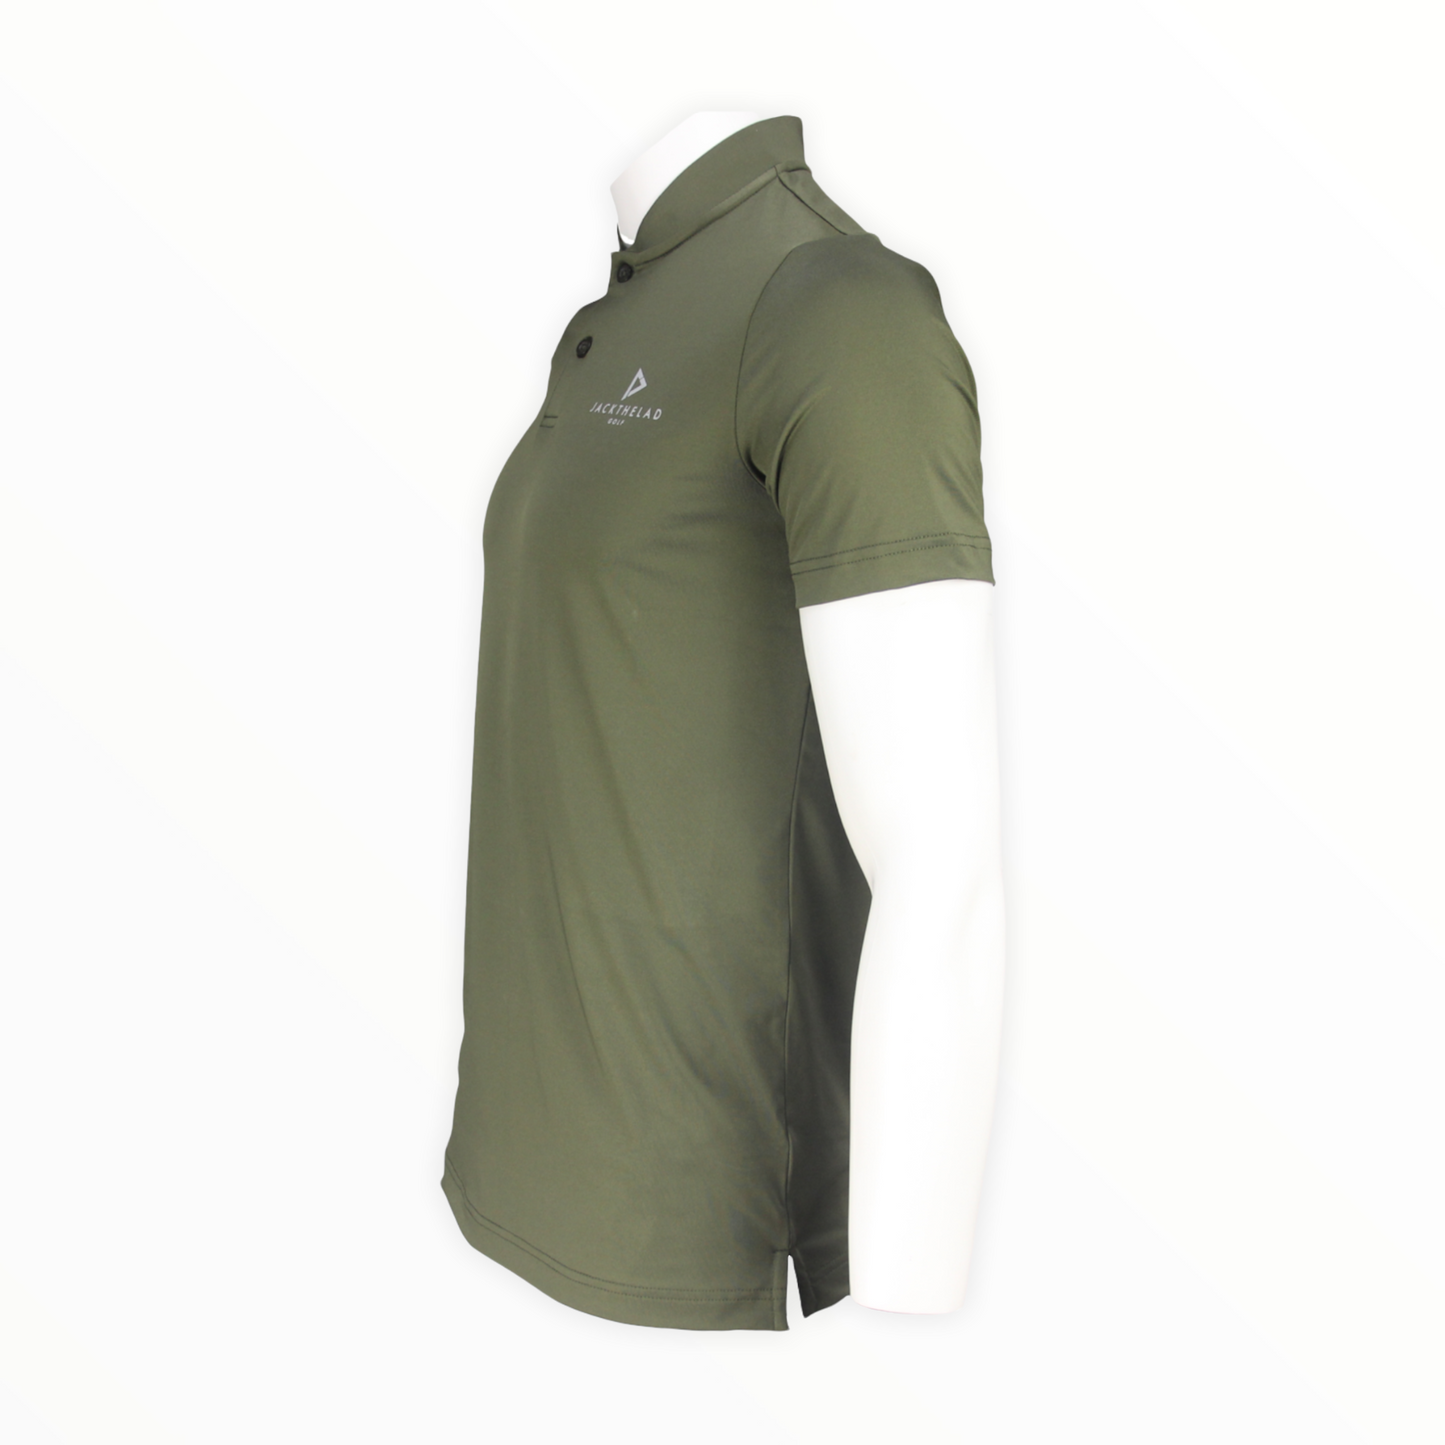 Edge golf polo - Olive side view